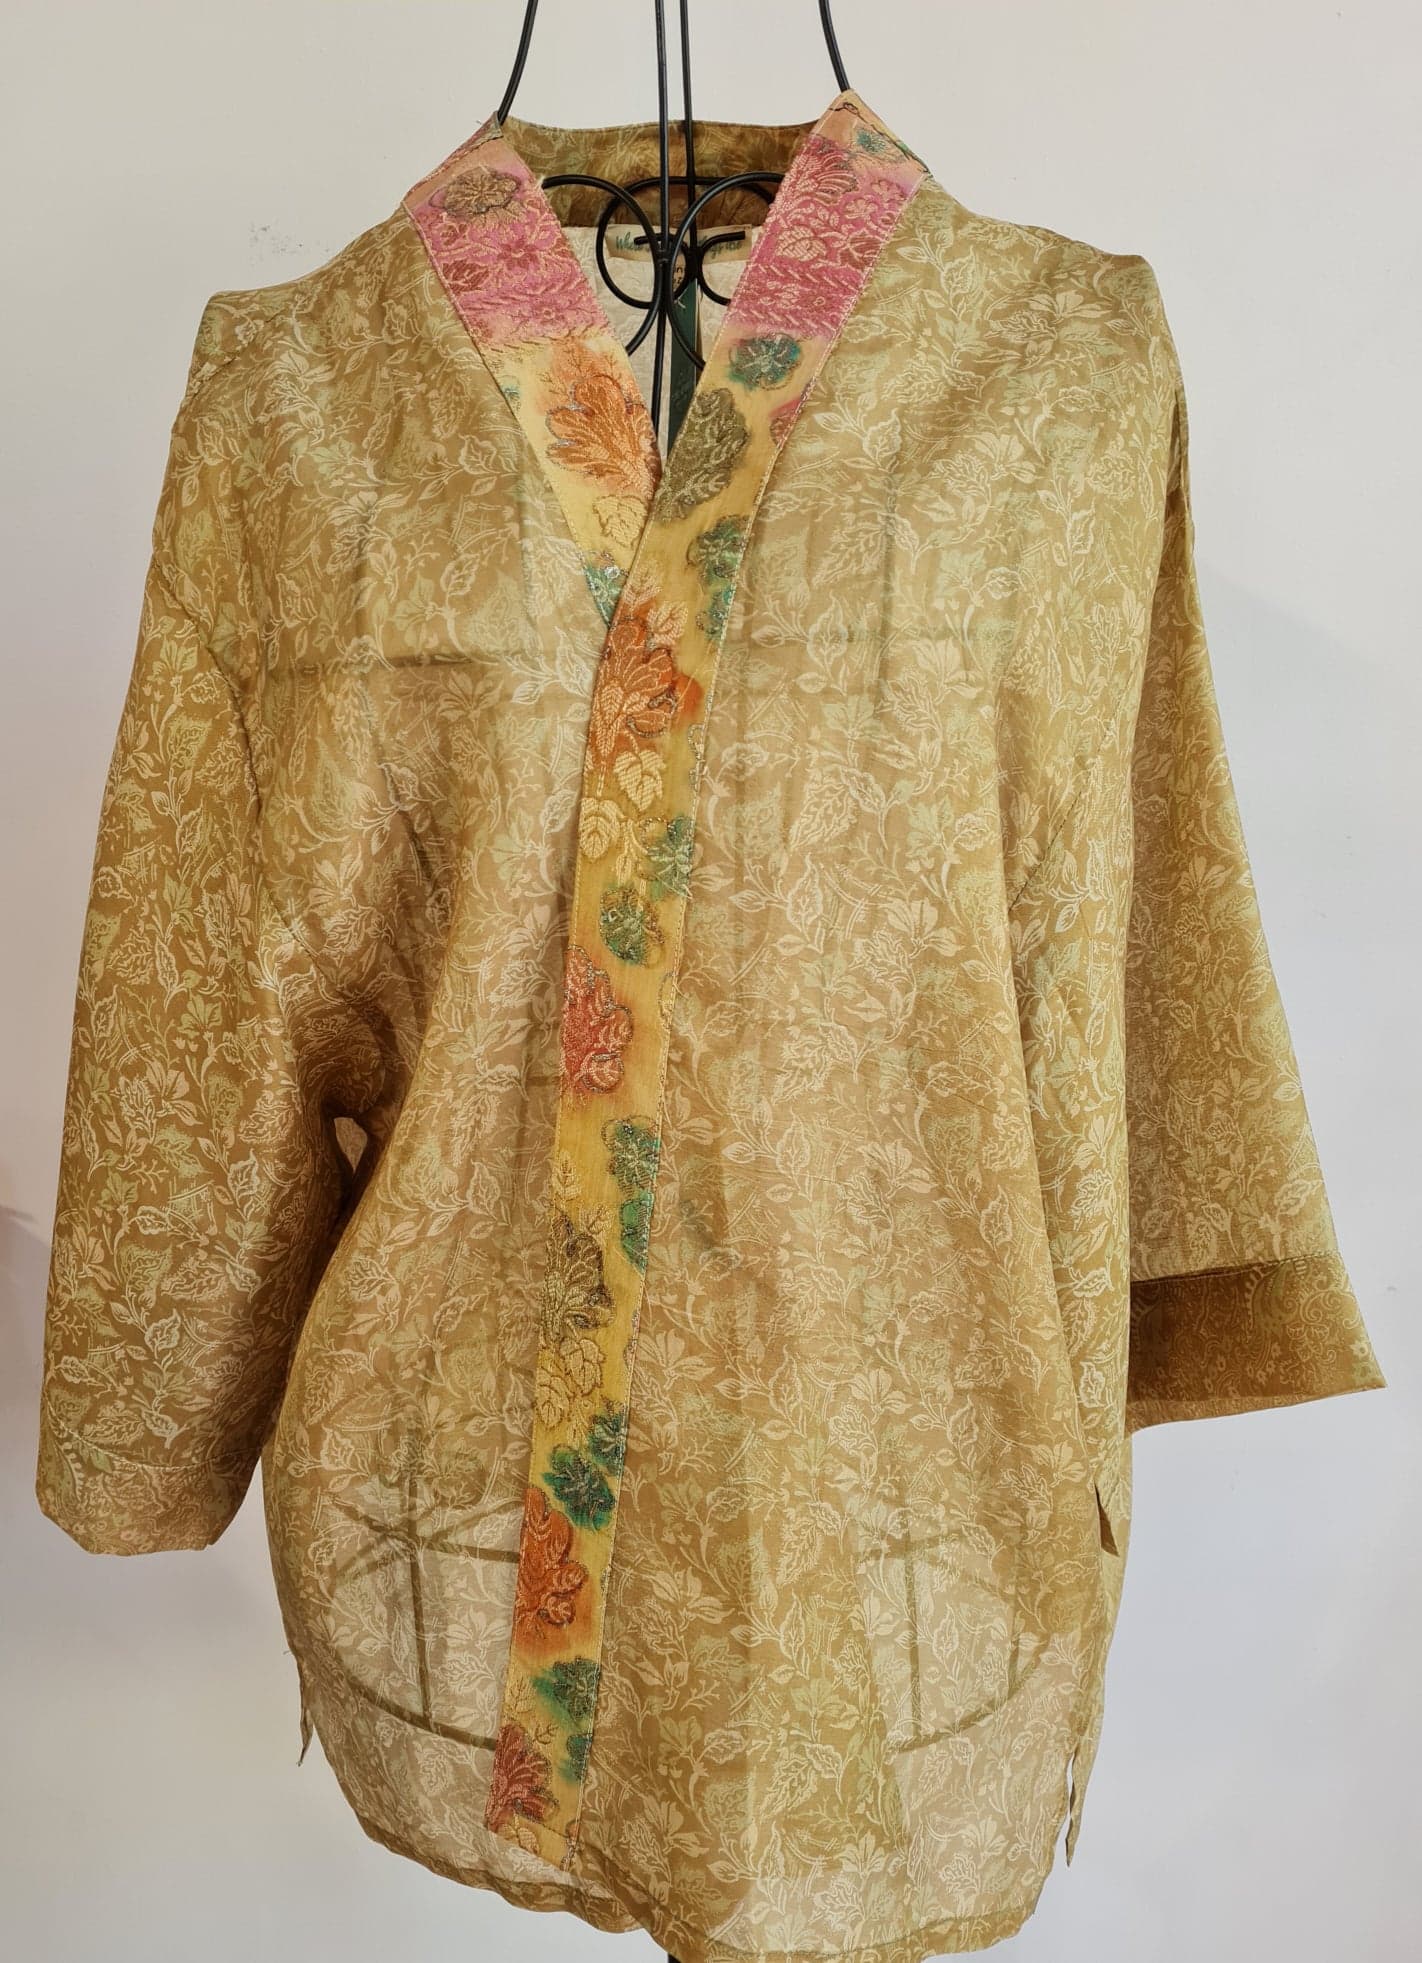 a cool yellow muse jacket is crossed over a wire mannequin. It features a pale yellow floral pattern covering the whole thing. a deep yellow trim lines the jackets front, with warm oranges, yellows and green leaves watercolour styled pattern, the trim itself gradients upward into a light red colour toward the neck of the jacket. 